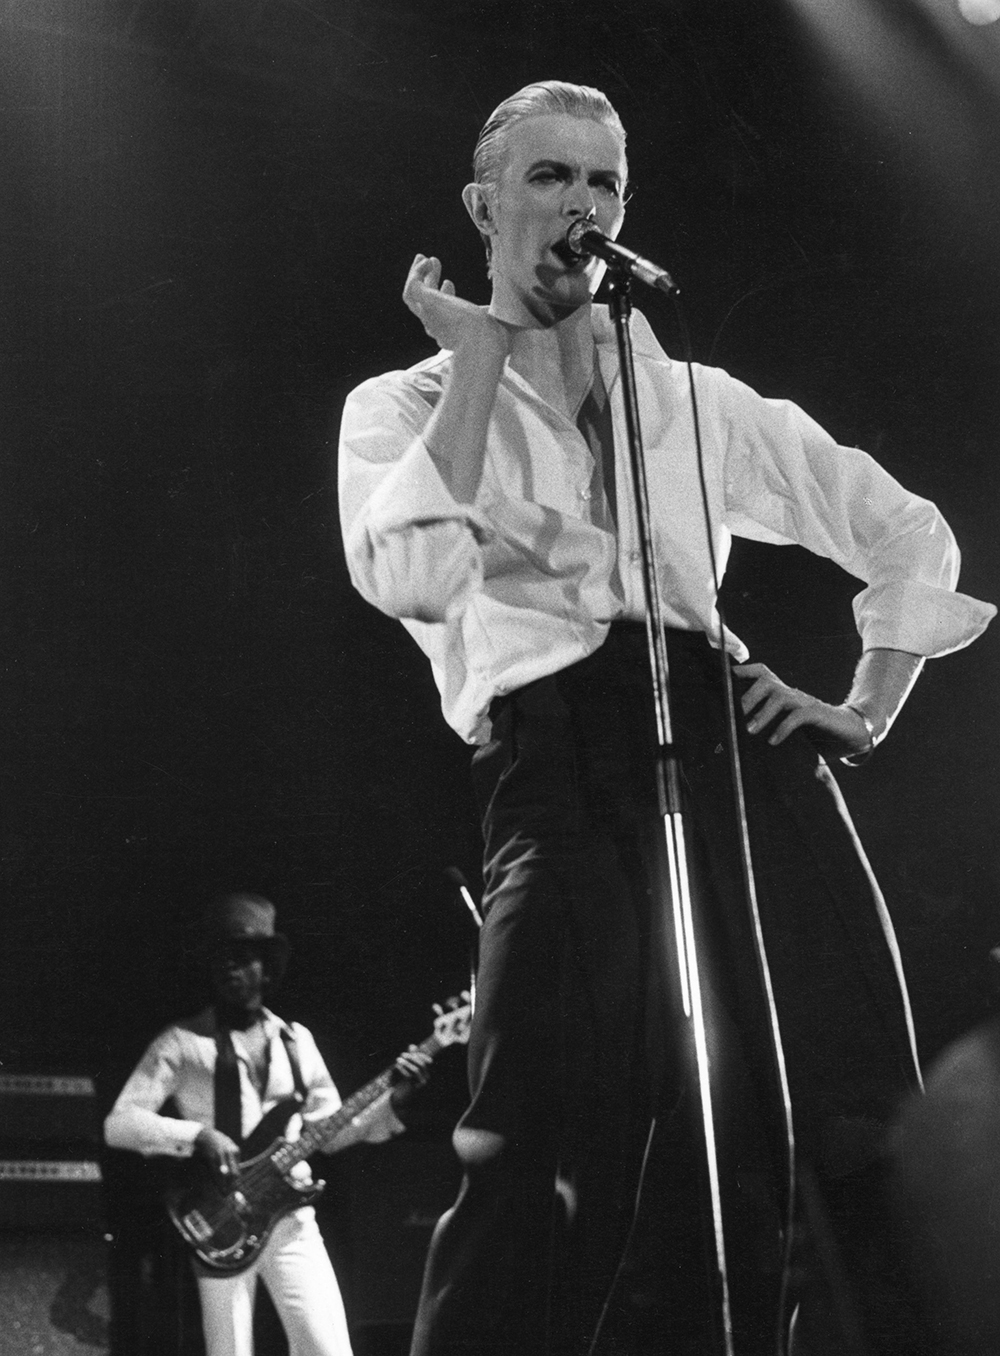 David Bowie performing live at Wembley stadium during his Station To Station tour in 1976.